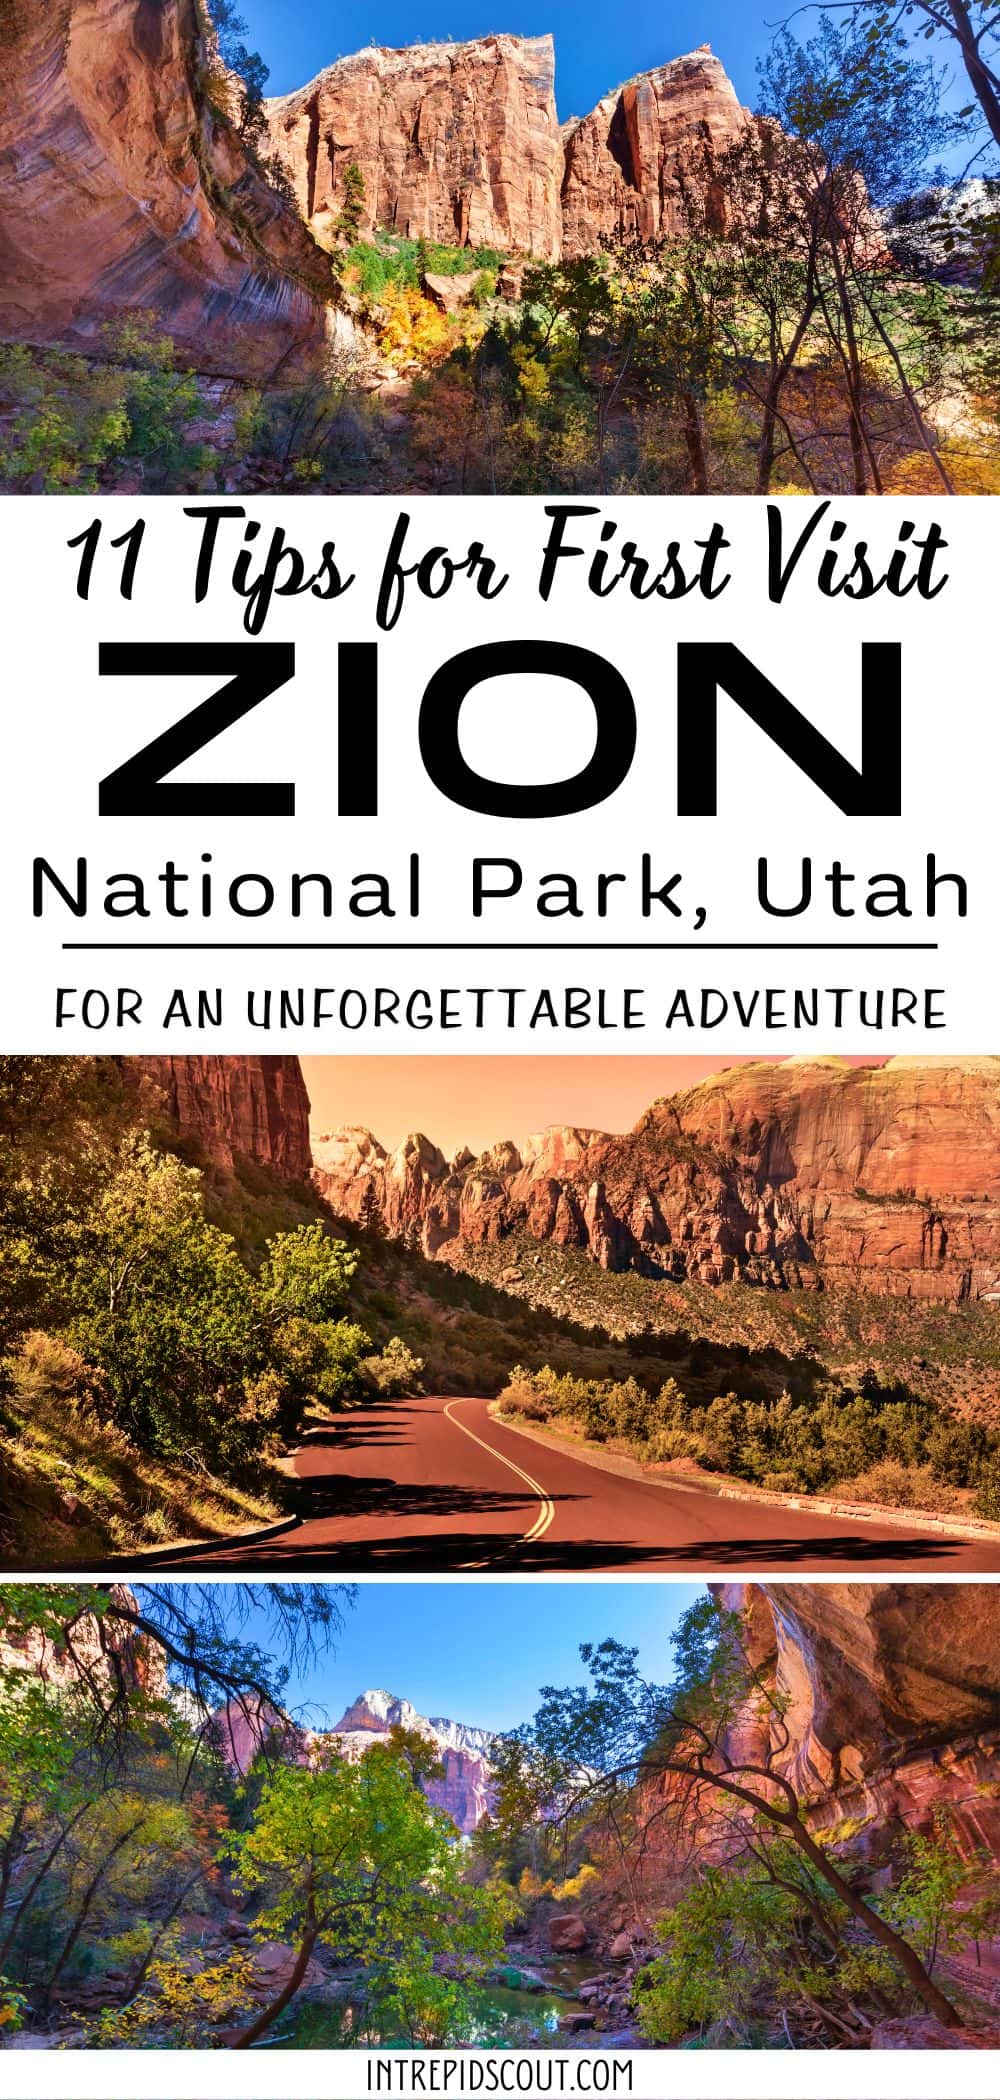 Tips for First Visit to Zion